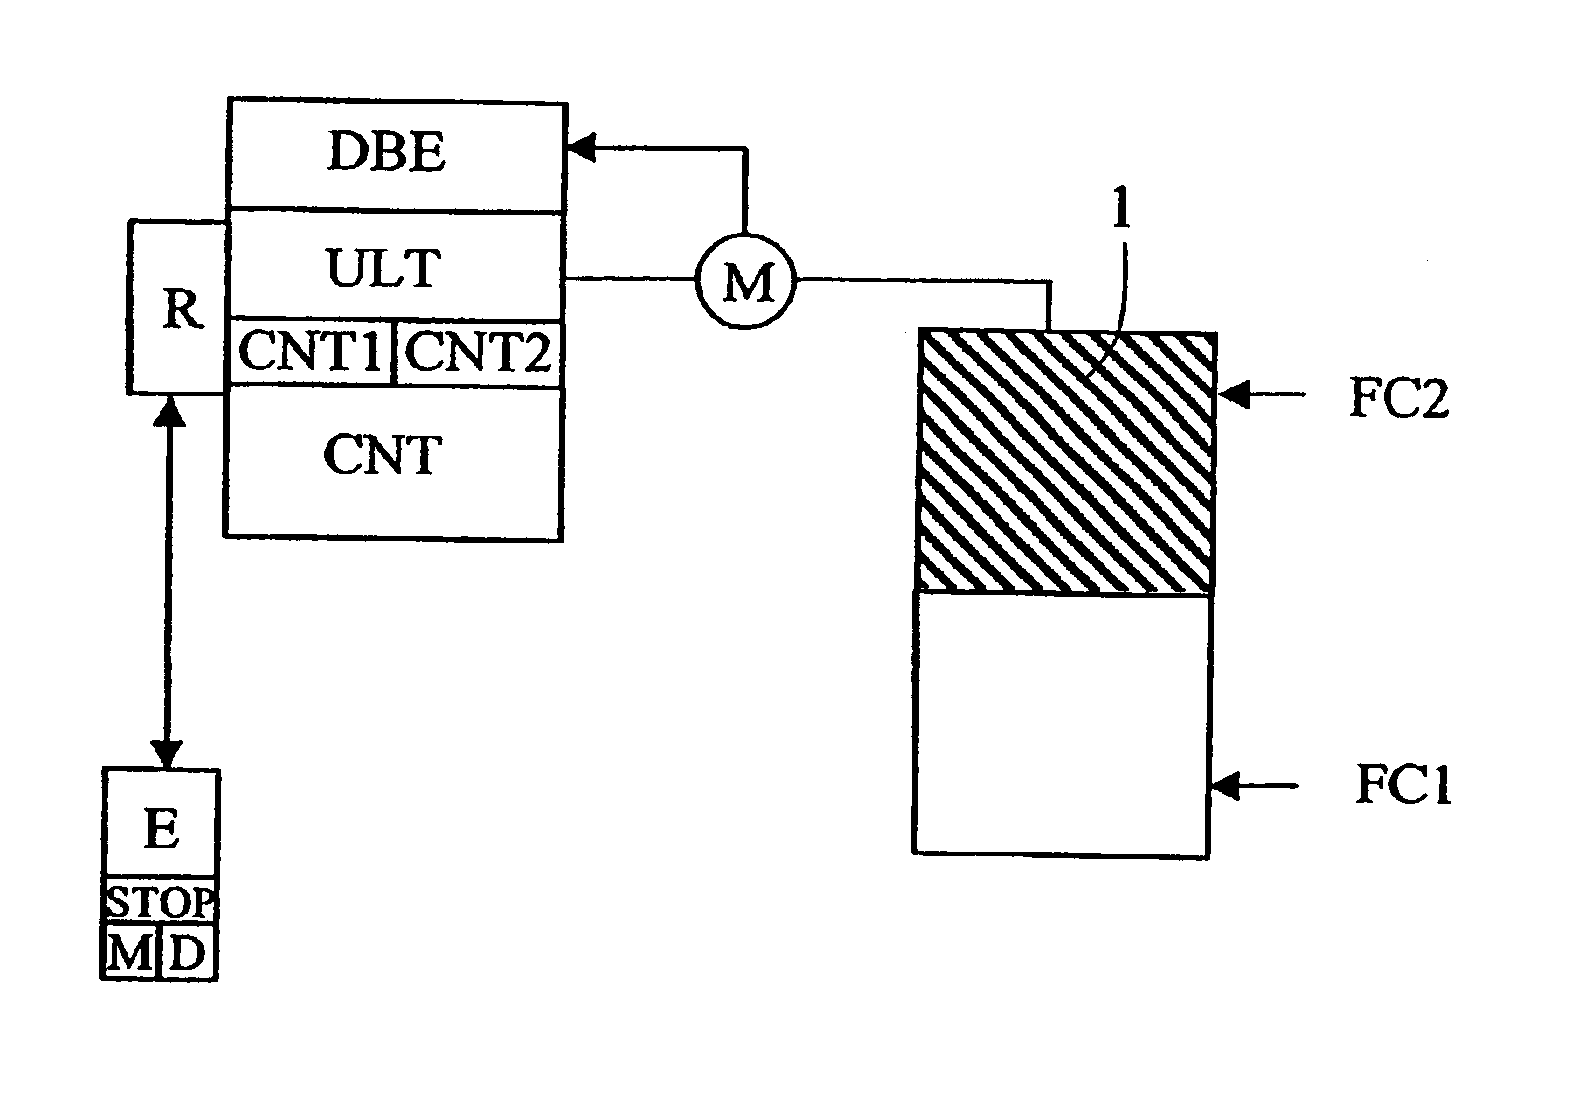 Process for learning the limits of travel of a roller blind actuator